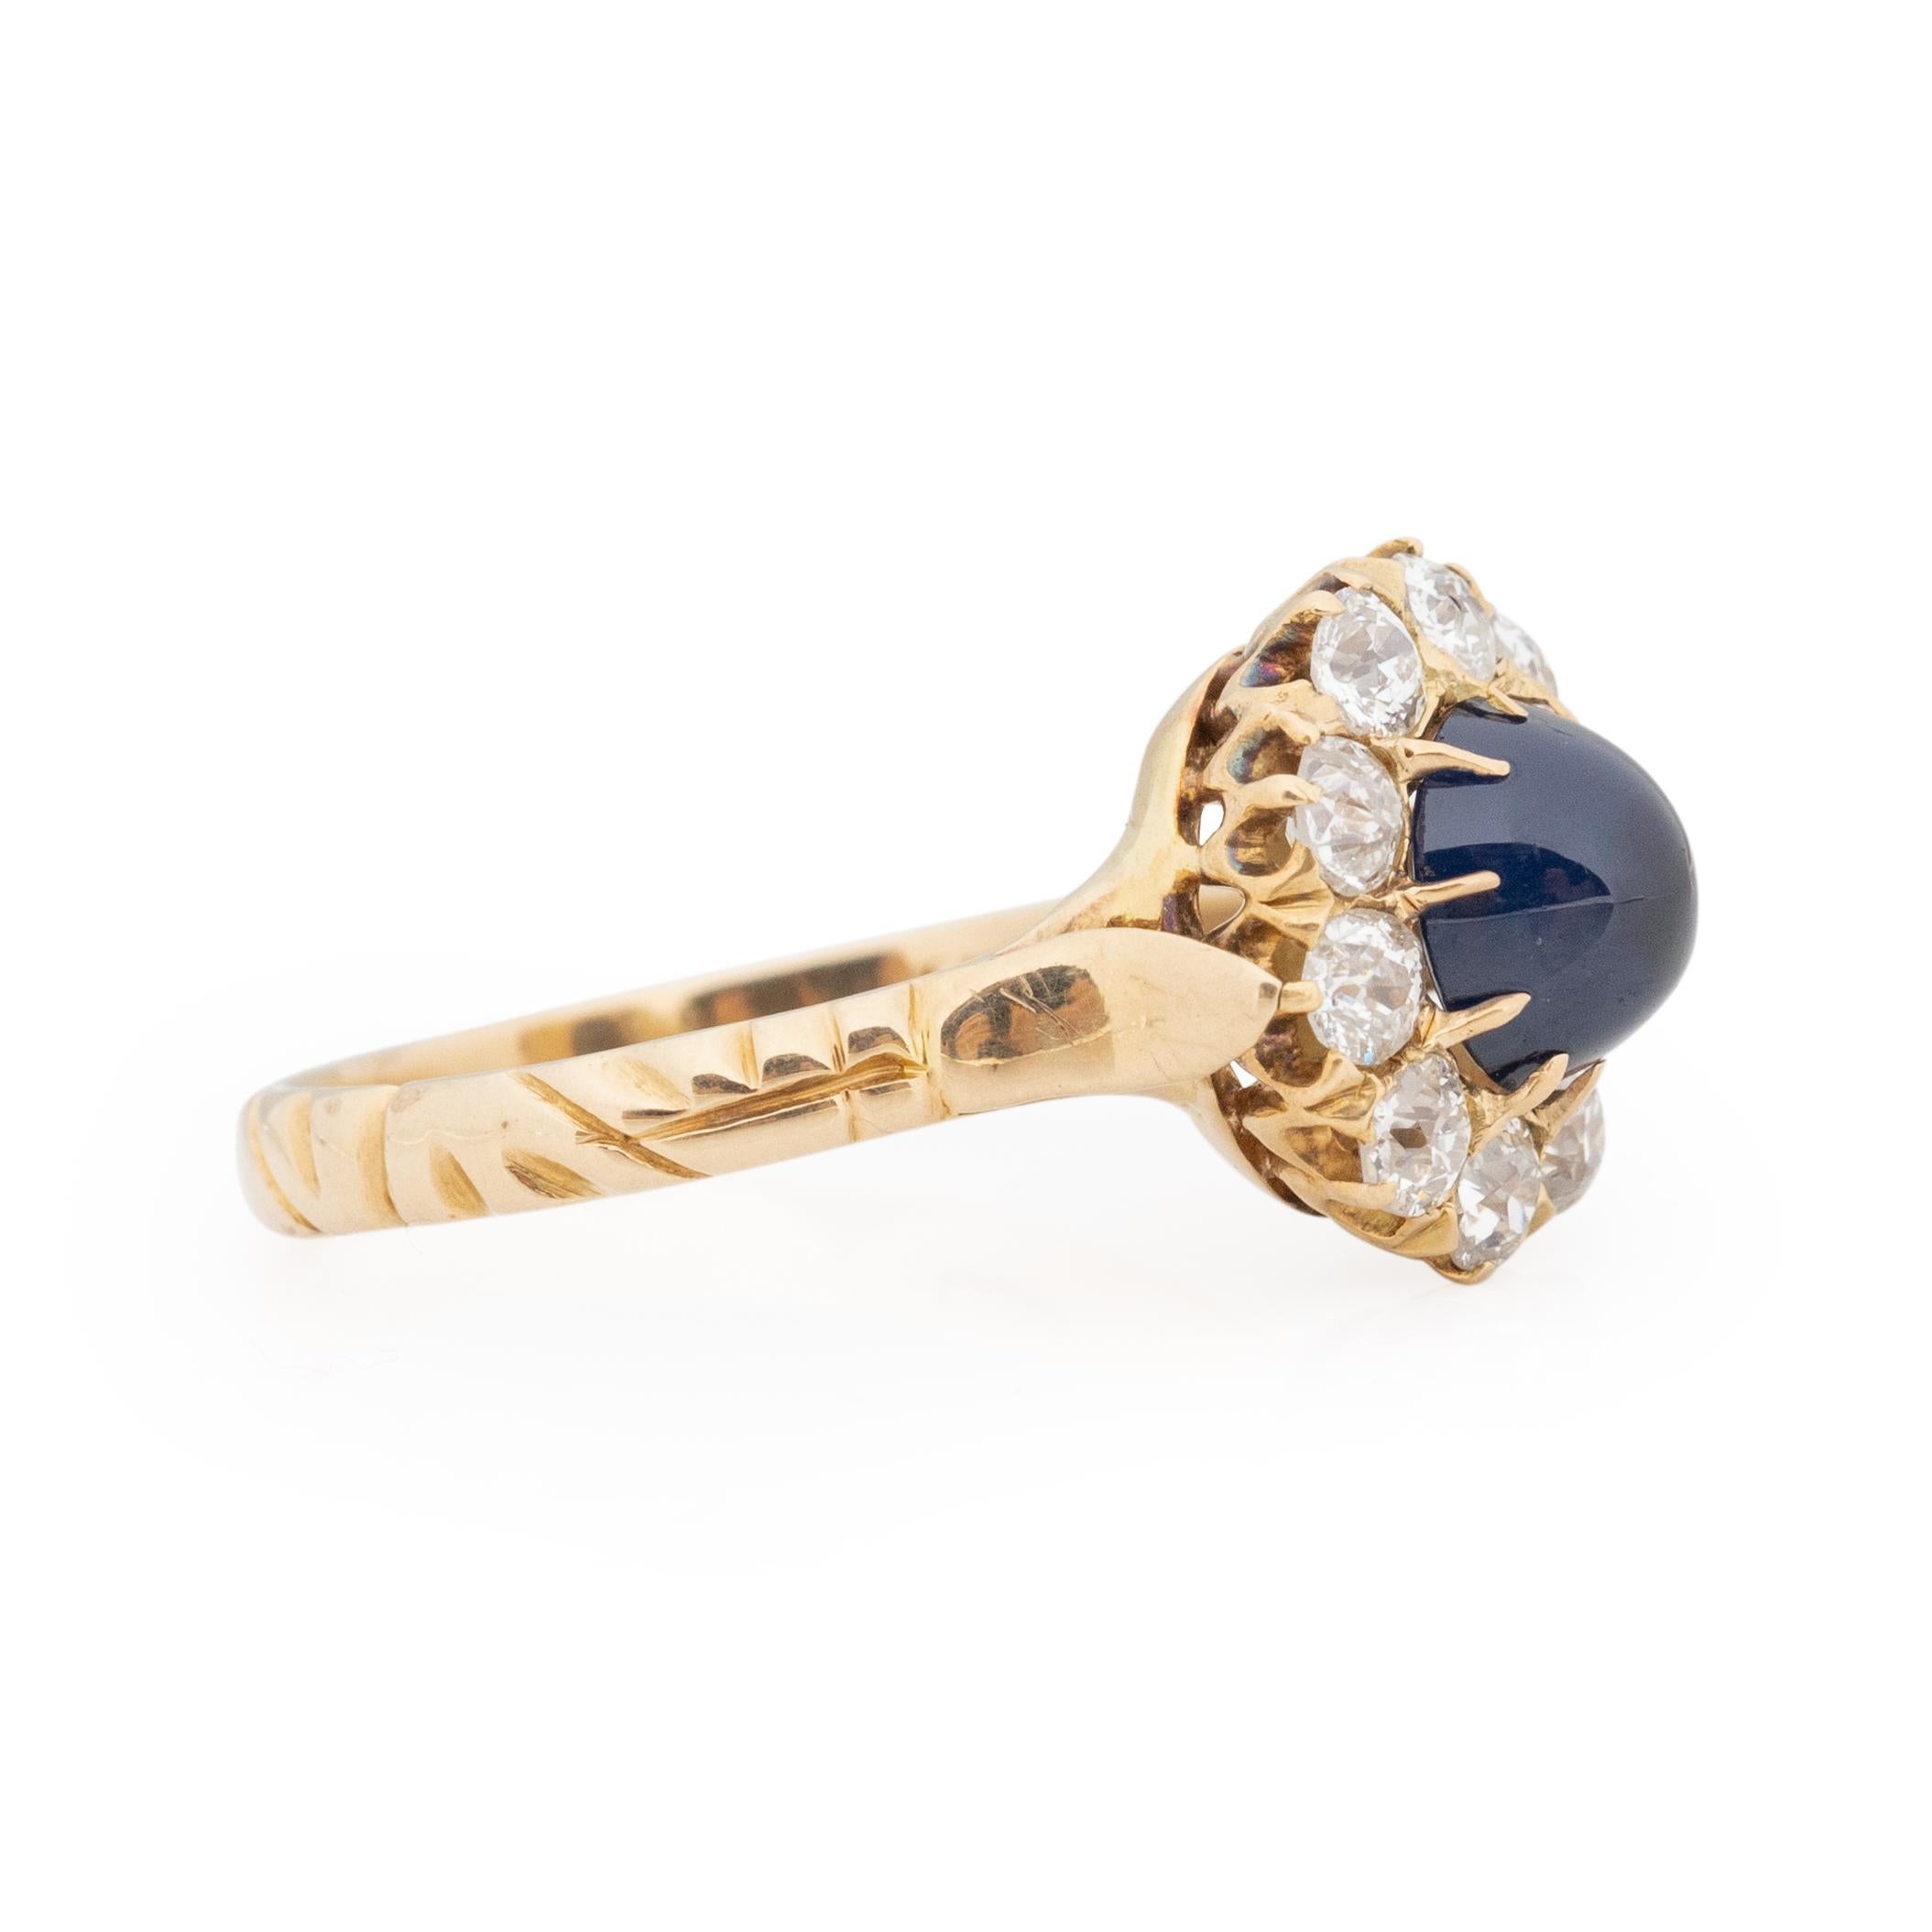 This ring has some outstanding craftsmanship. Crafted in 14K yellow gold, starting at the shank wrapping around the finger on the strait shank is an organic engraving that leads up the the cathedral shanks. In the center of the shanks is a beautiful